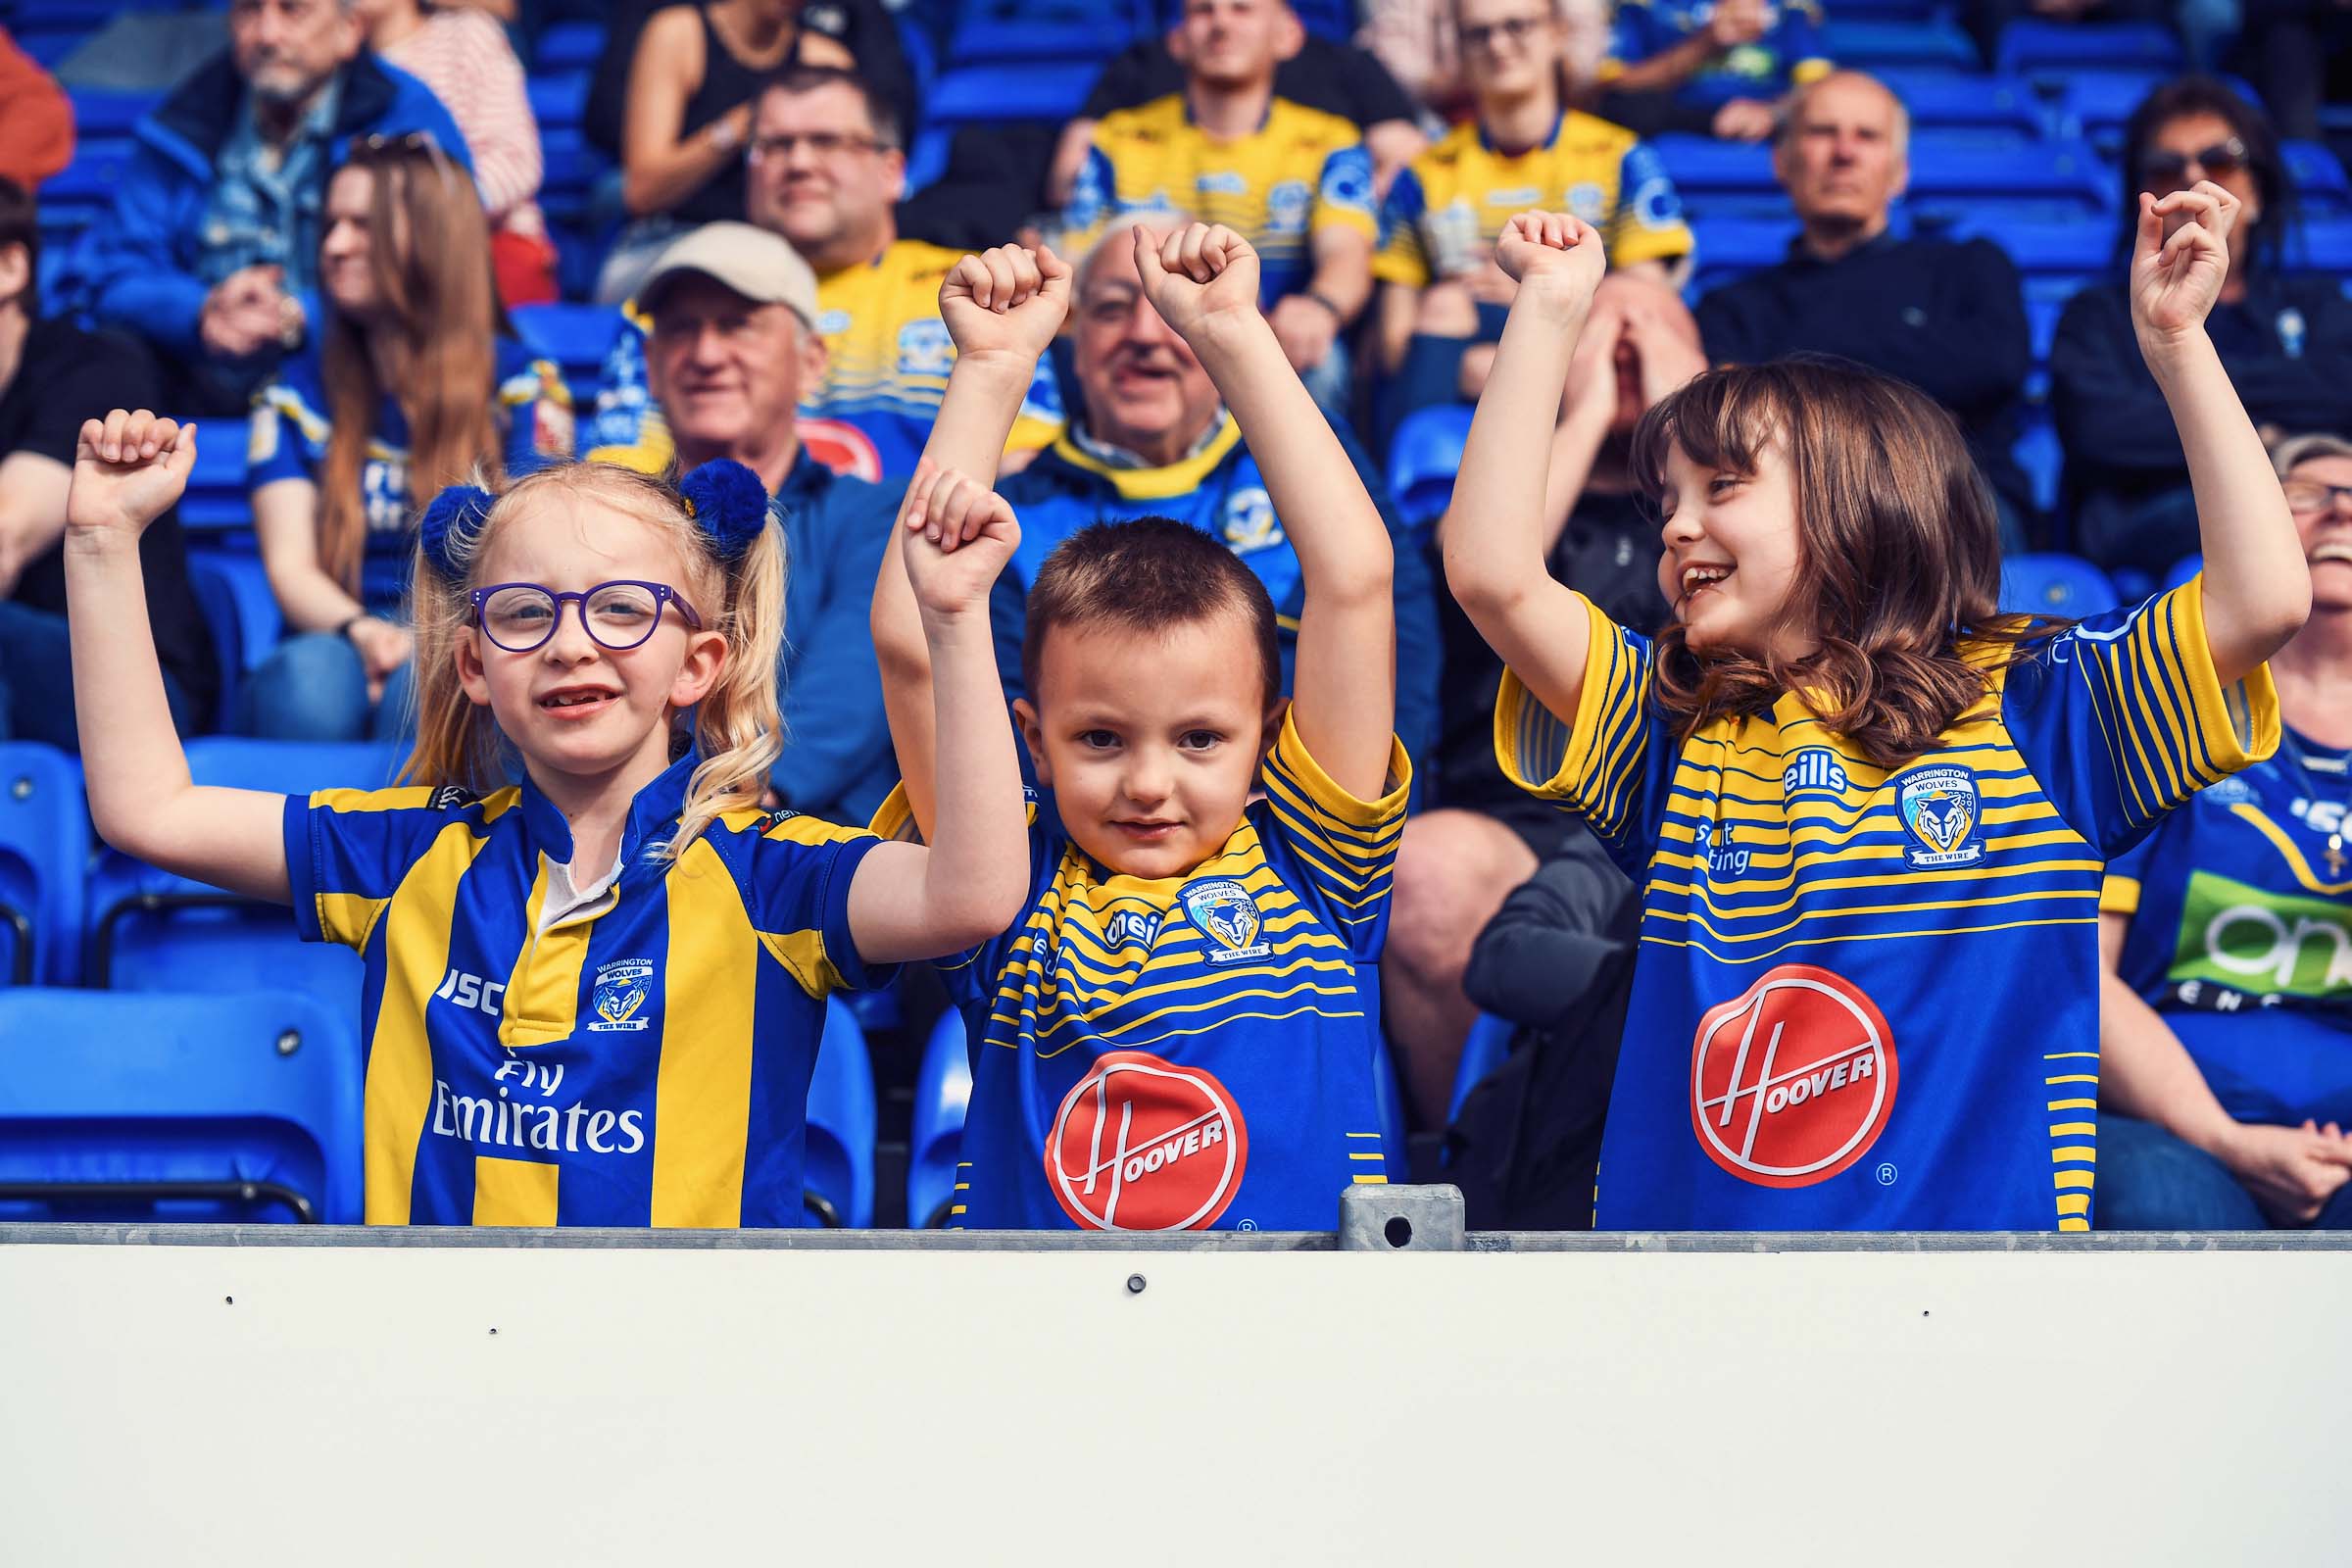 Warrington Wolves on X: "𝐉𝐮𝐧𝐢𝐨𝐫 𝐬𝐮𝐩𝐩𝐨𝐫𝐭𝐞𝐫𝐬 | 𝐎𝐩𝐞𝐧  𝐭𝐫𝐚𝐢𝐧𝐢𝐧𝐠 𝐬𝐞𝐬𝐬𝐢𝐨𝐧 🐺 We're inviting our younger fans to  attend our team run session at the HJ this Thursday 🏉 Check your inboxes to